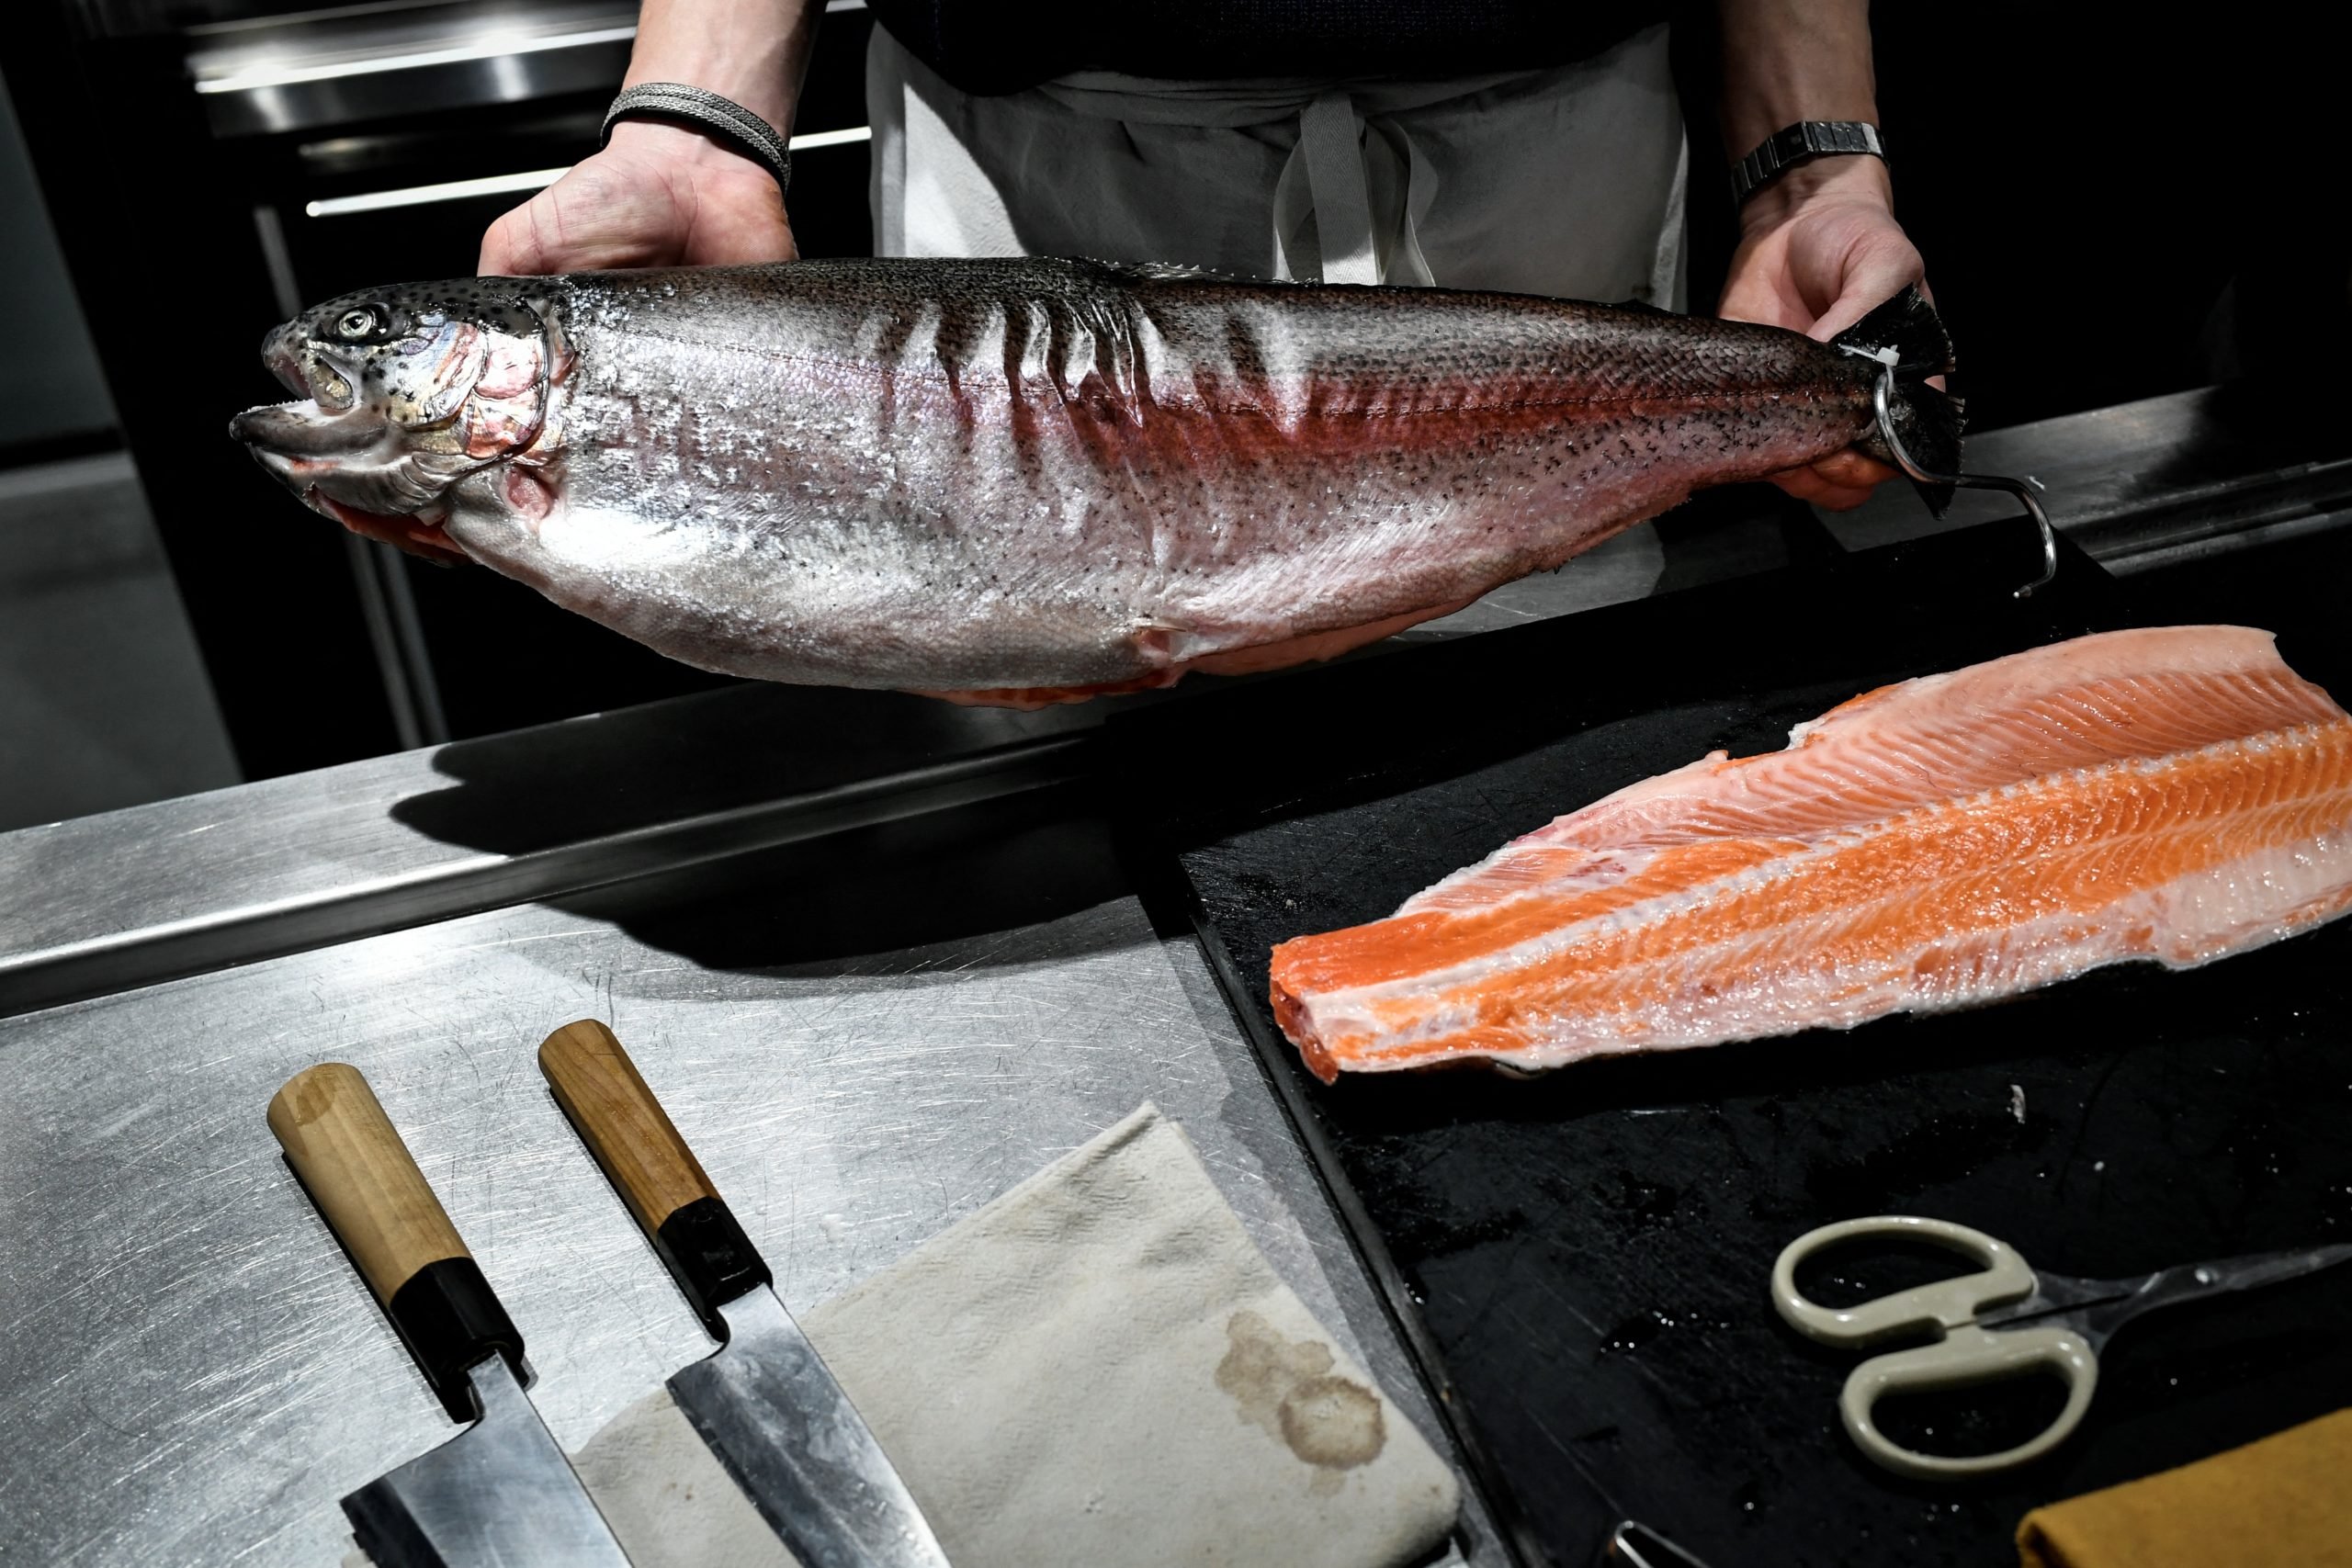 An employee shows a trout getting prepared for sashimi at the Viot fishershop in Paris on February 15, 2024. Salmon is the second most consumed seafood product, behind tuna, with an annual average of 2.7 kg per capita, according to France Agrimer, the French national agency for agriculture and fisheries. Arthur Viot, a 28-year-old fishmonger has replaced it in his stalls with trout, which he serves as sashimi. (Photo by STEPHANE DE SAKUTIN/AFP via Getty Images)